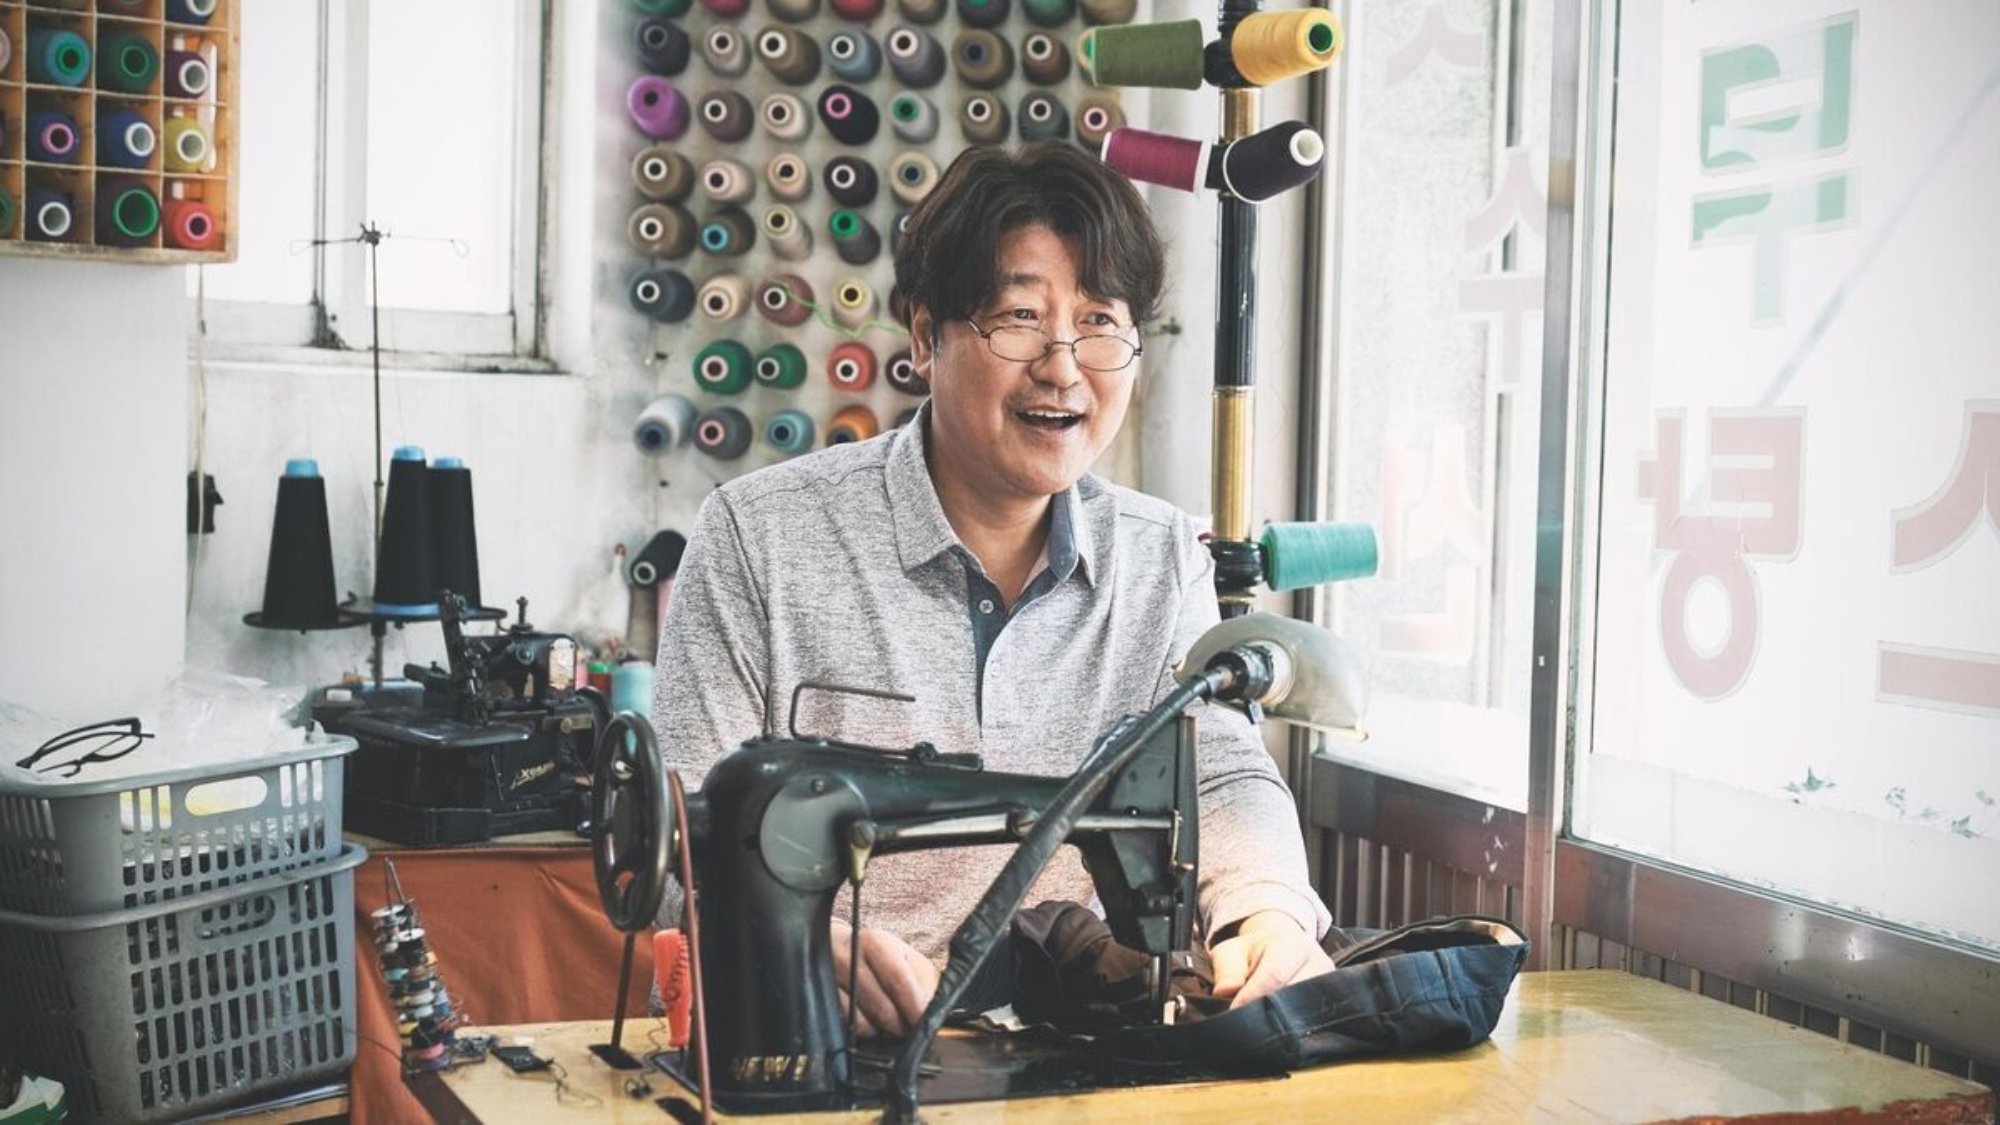 'Broker' Song Kang-ho as Sang-hyeon smiling while sitting behind a sewing machine while wearing glasses